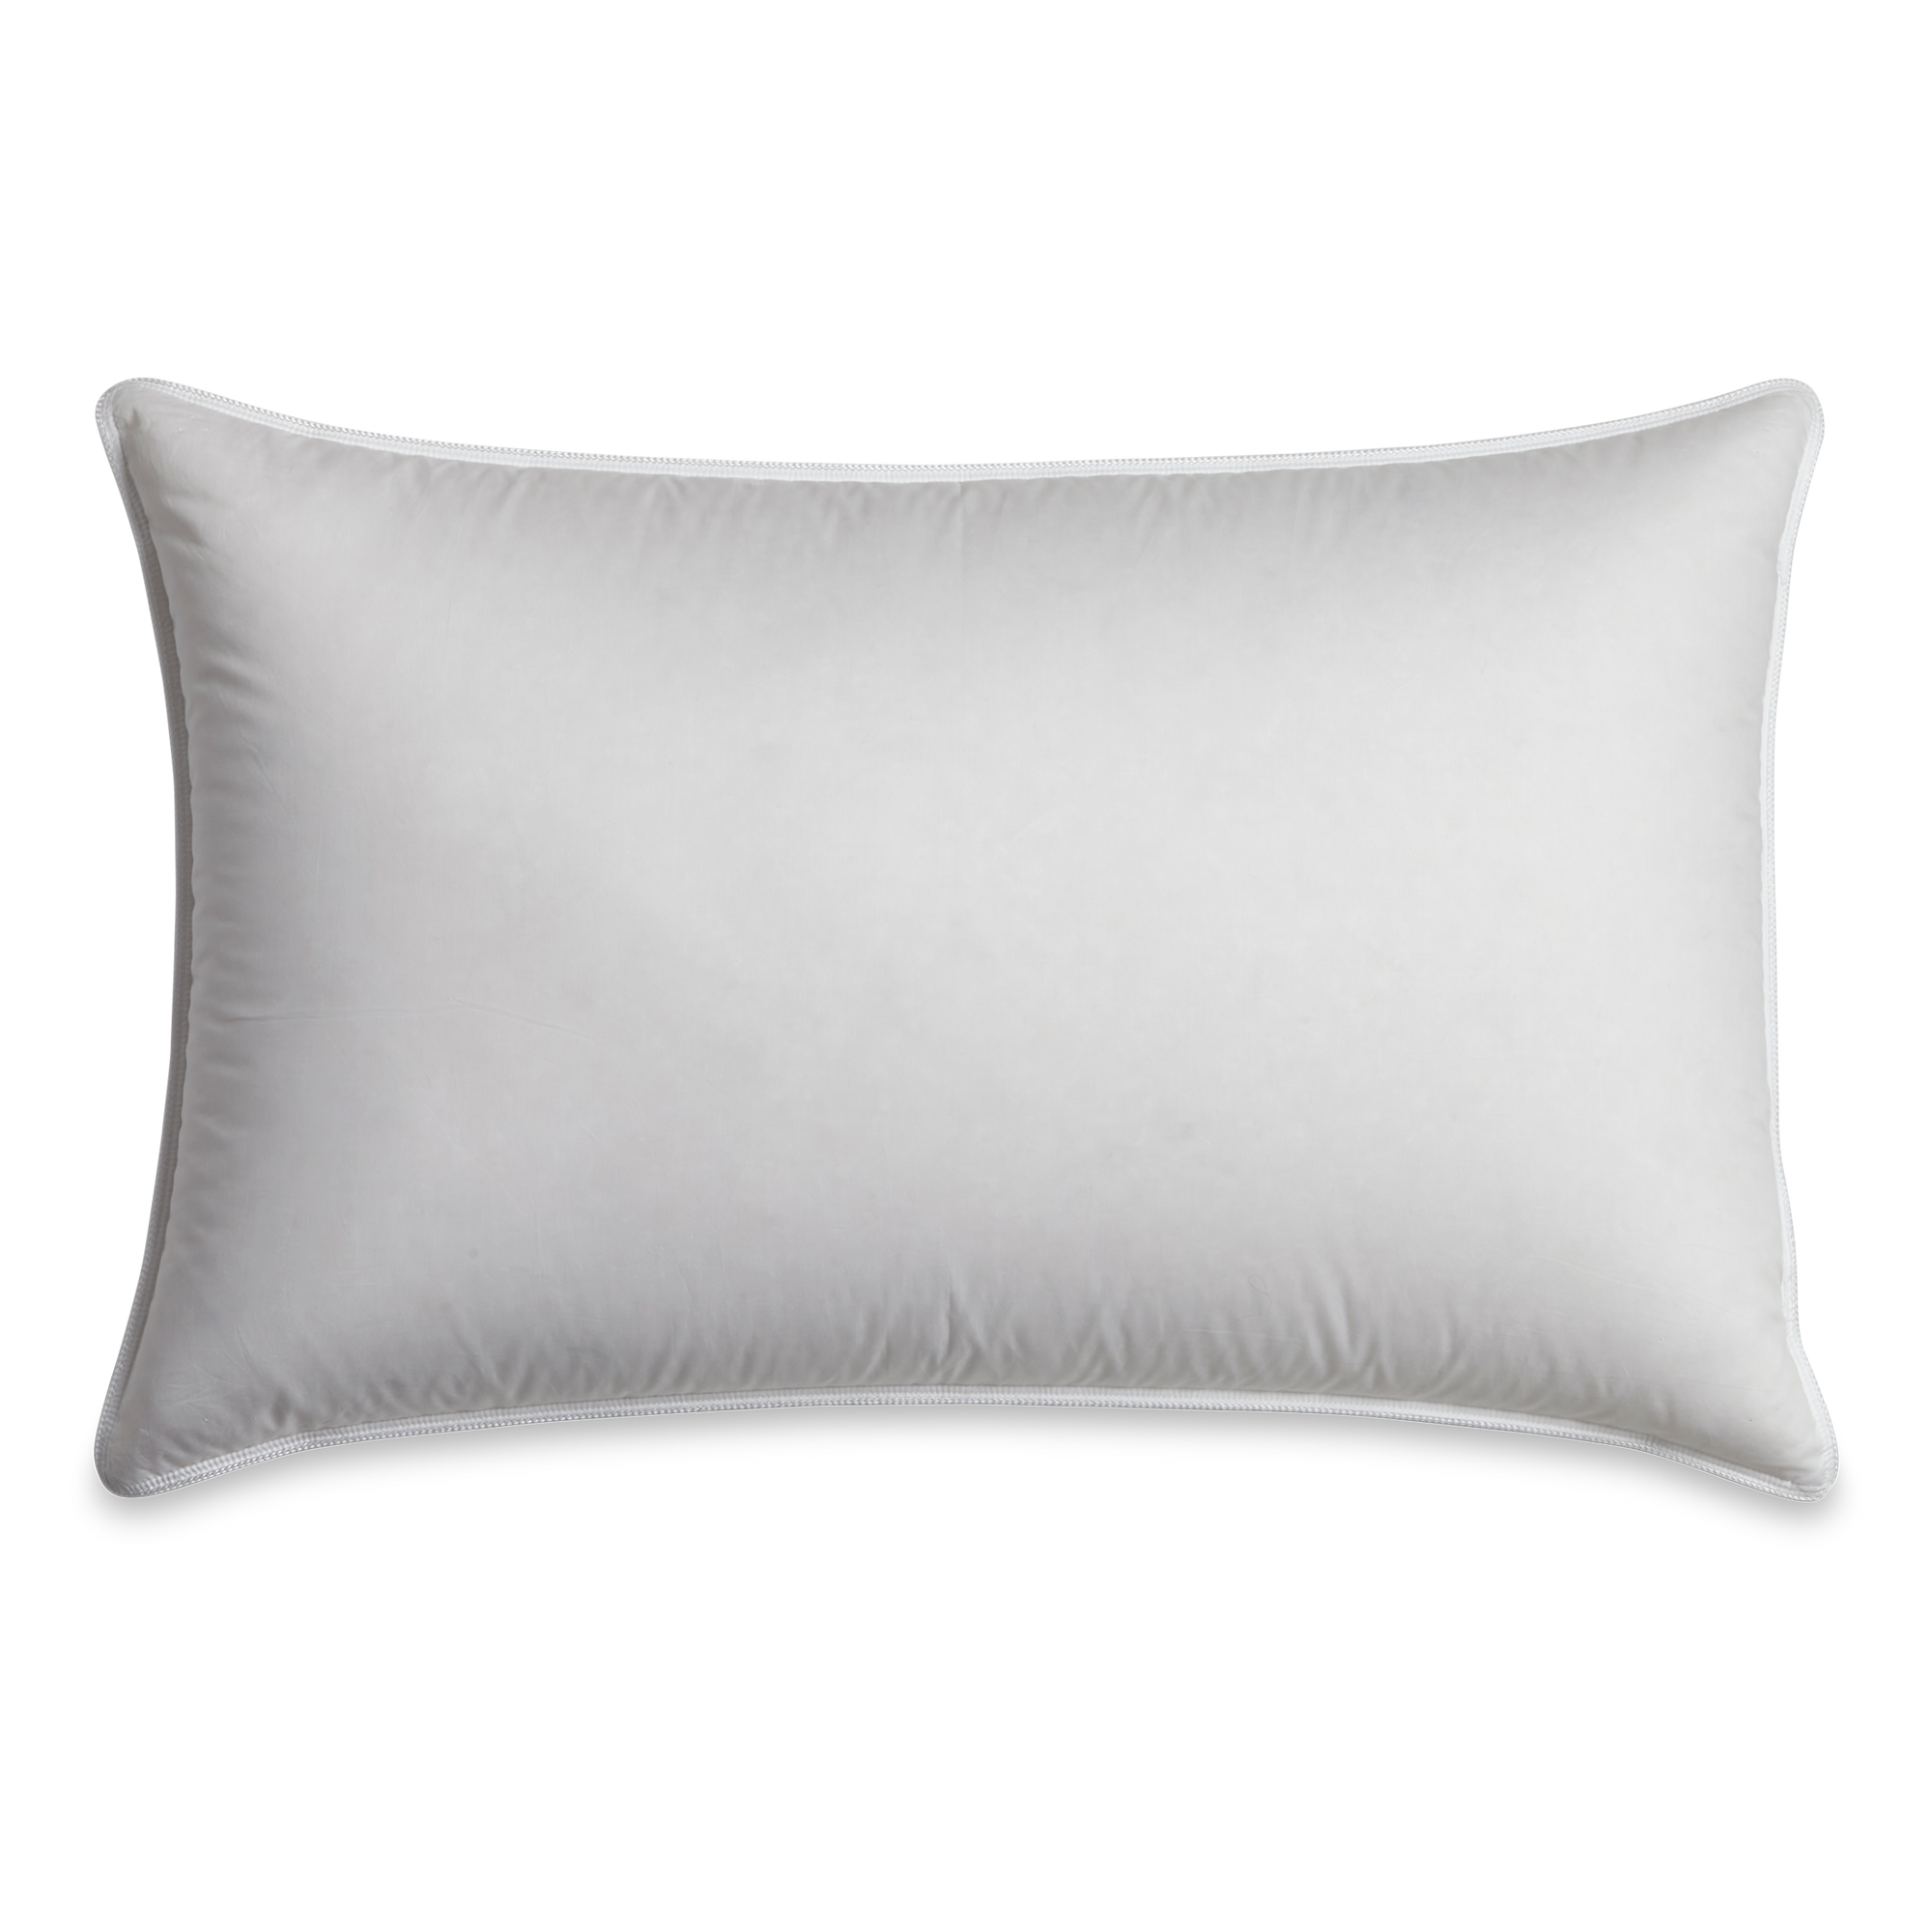 Our duck down chamber pillow features a hypoallergenic small duck feather and down support centre, surrounded by 550 Fill Power Duck Down.